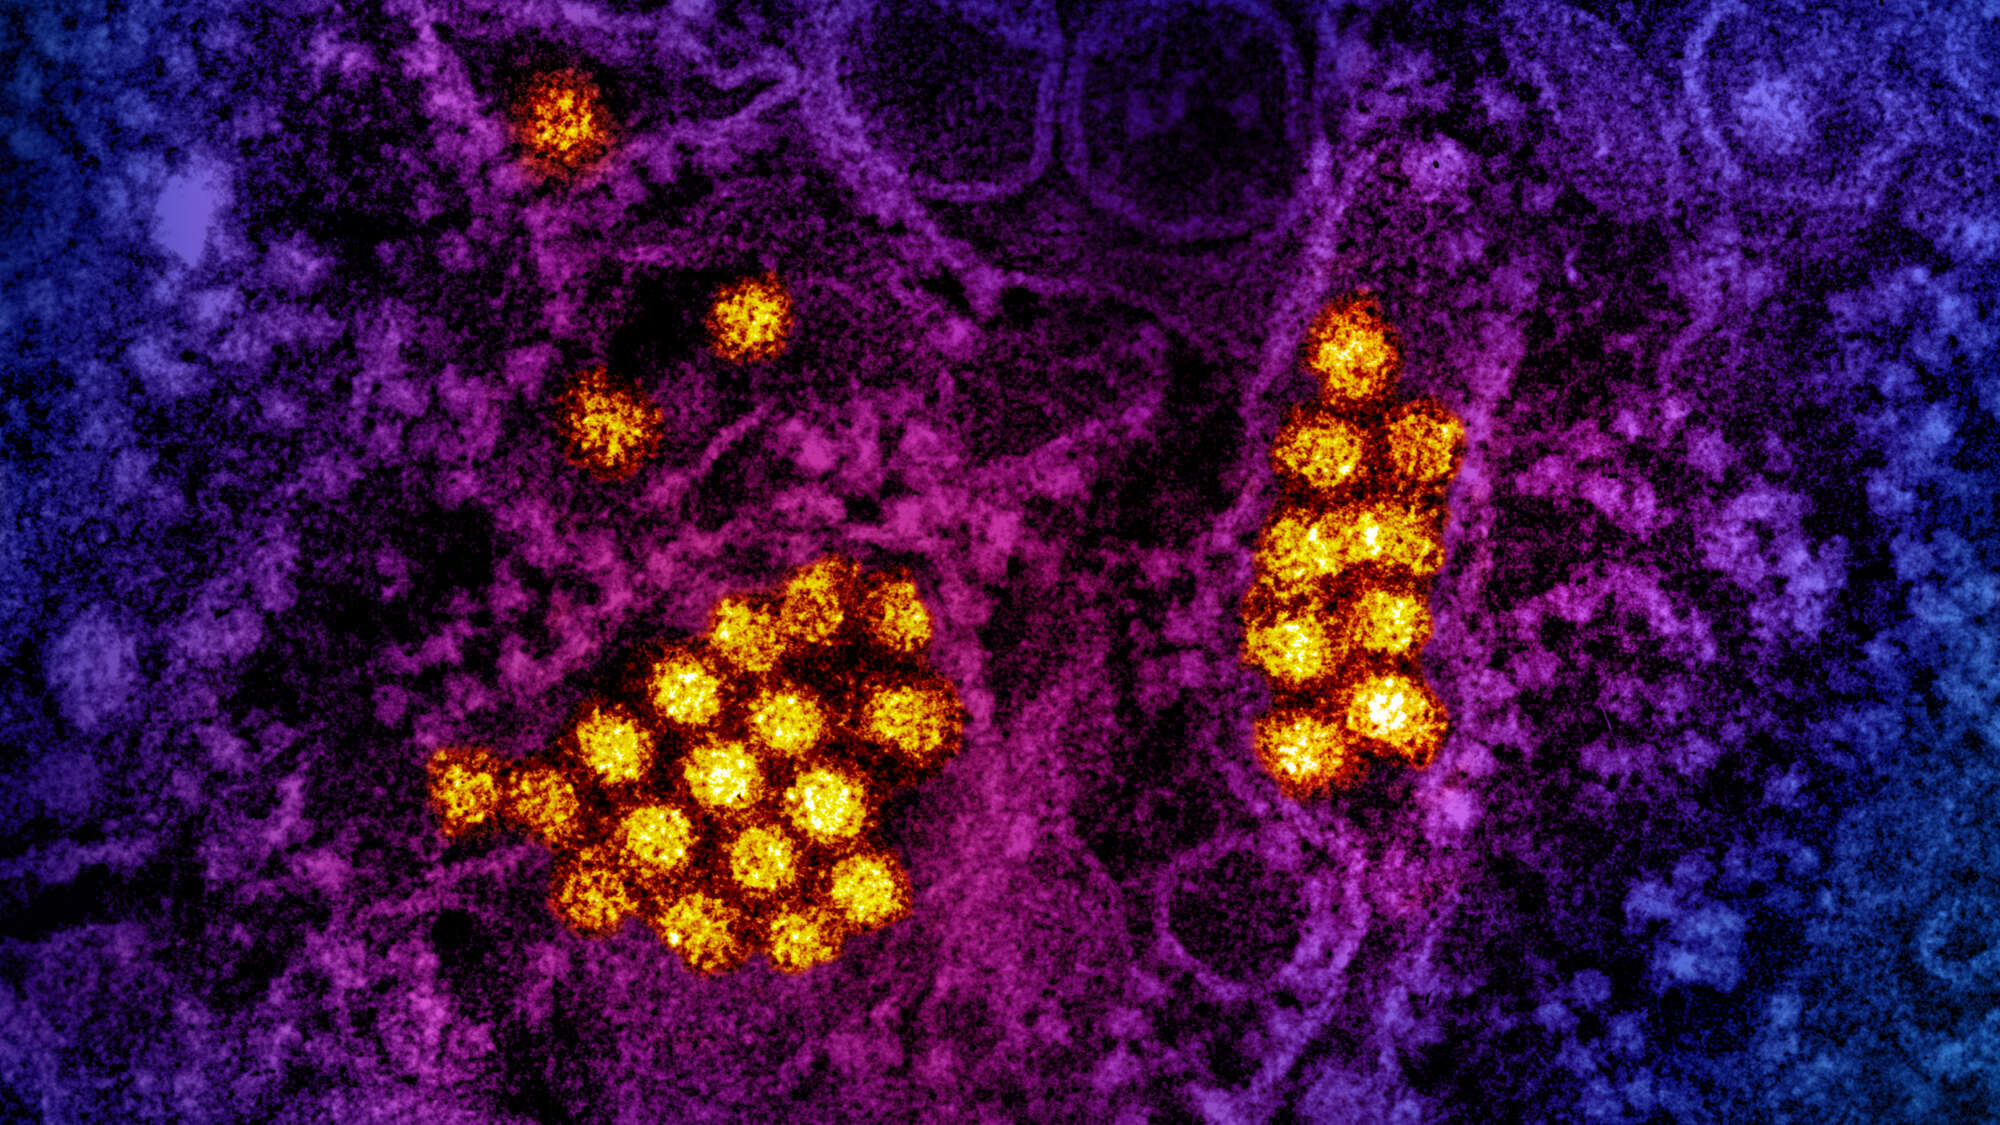 ransmission electron micrograph of dengue virus particles (gold). Micrograph courtesy of CDC; colorization and visual effects by NIAID © CDC and NIAID